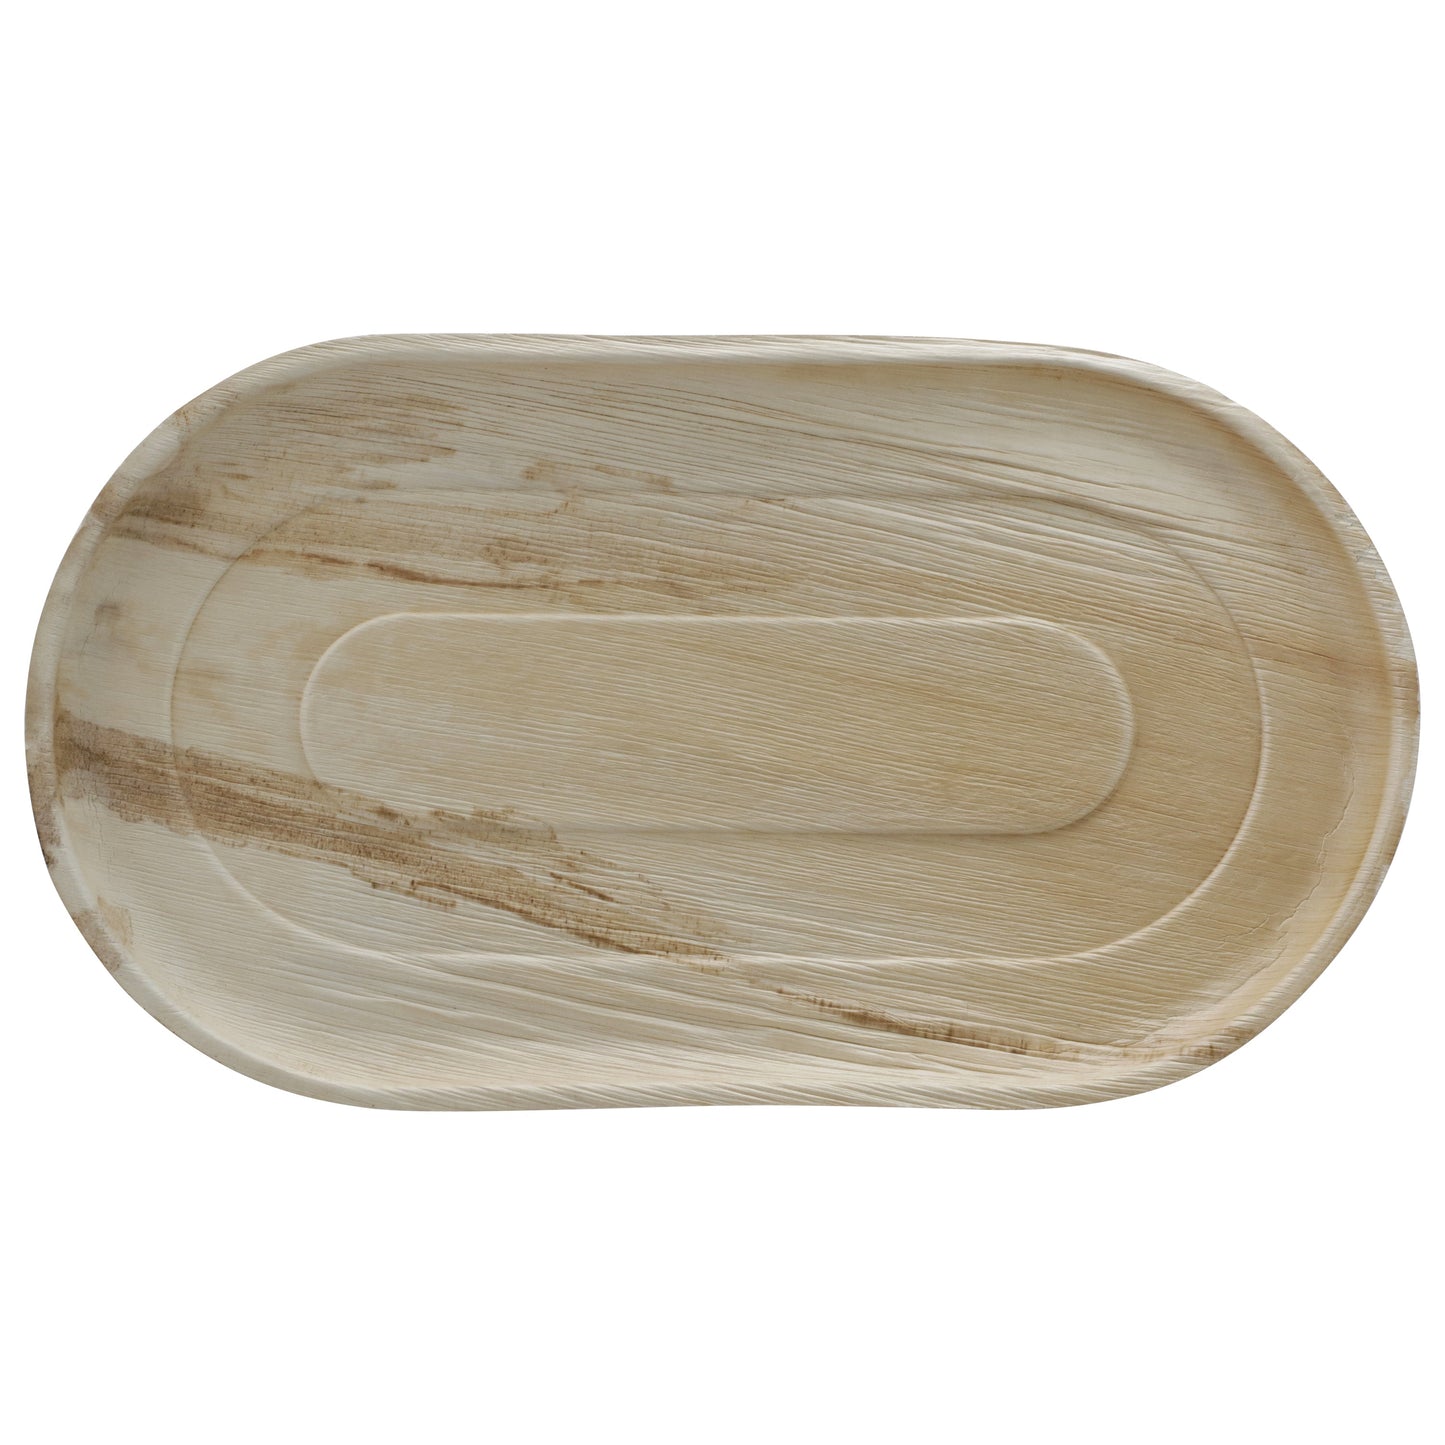 12" x 22" Oval Tray | Compostable Palm Leaf (Case of 50)